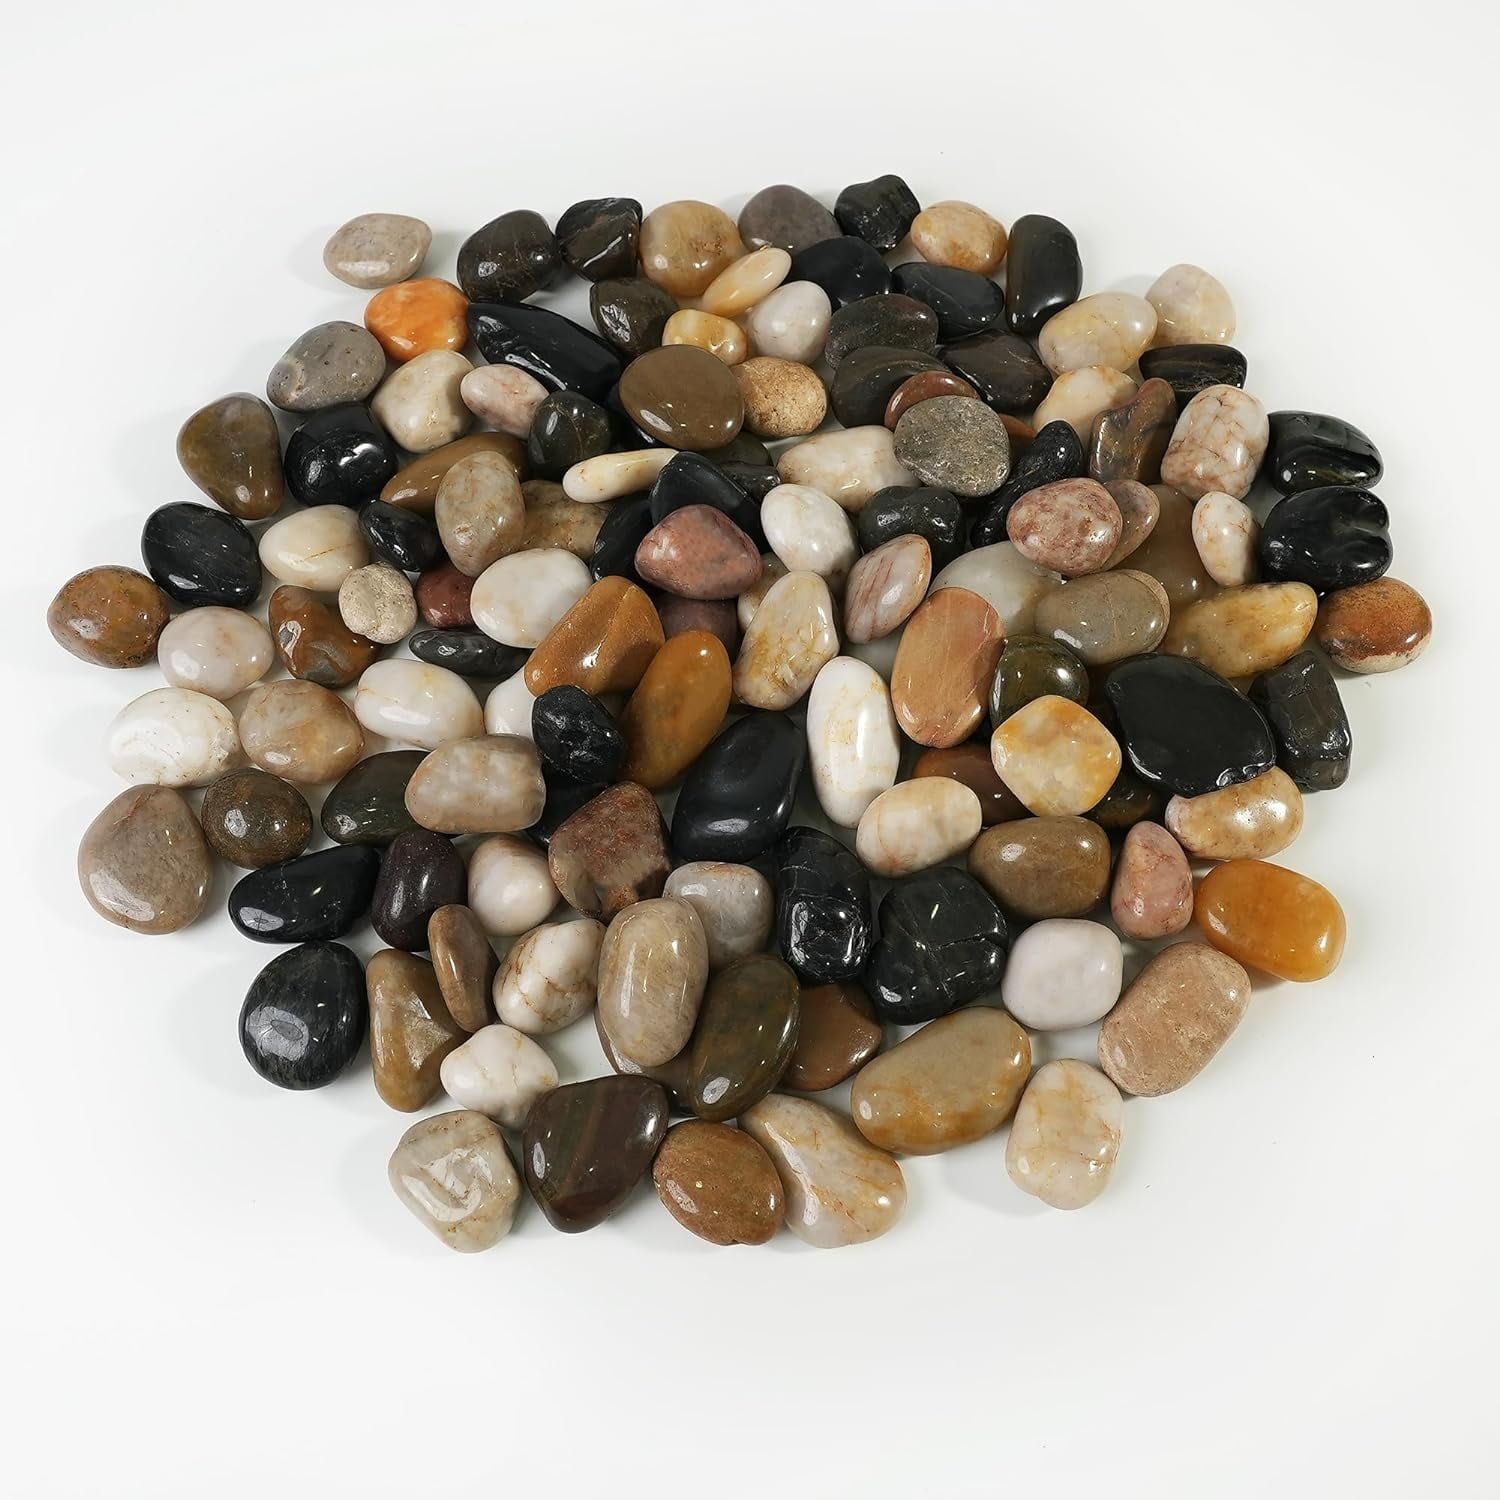 PGN 40 River Rocks - 2-4 Inches